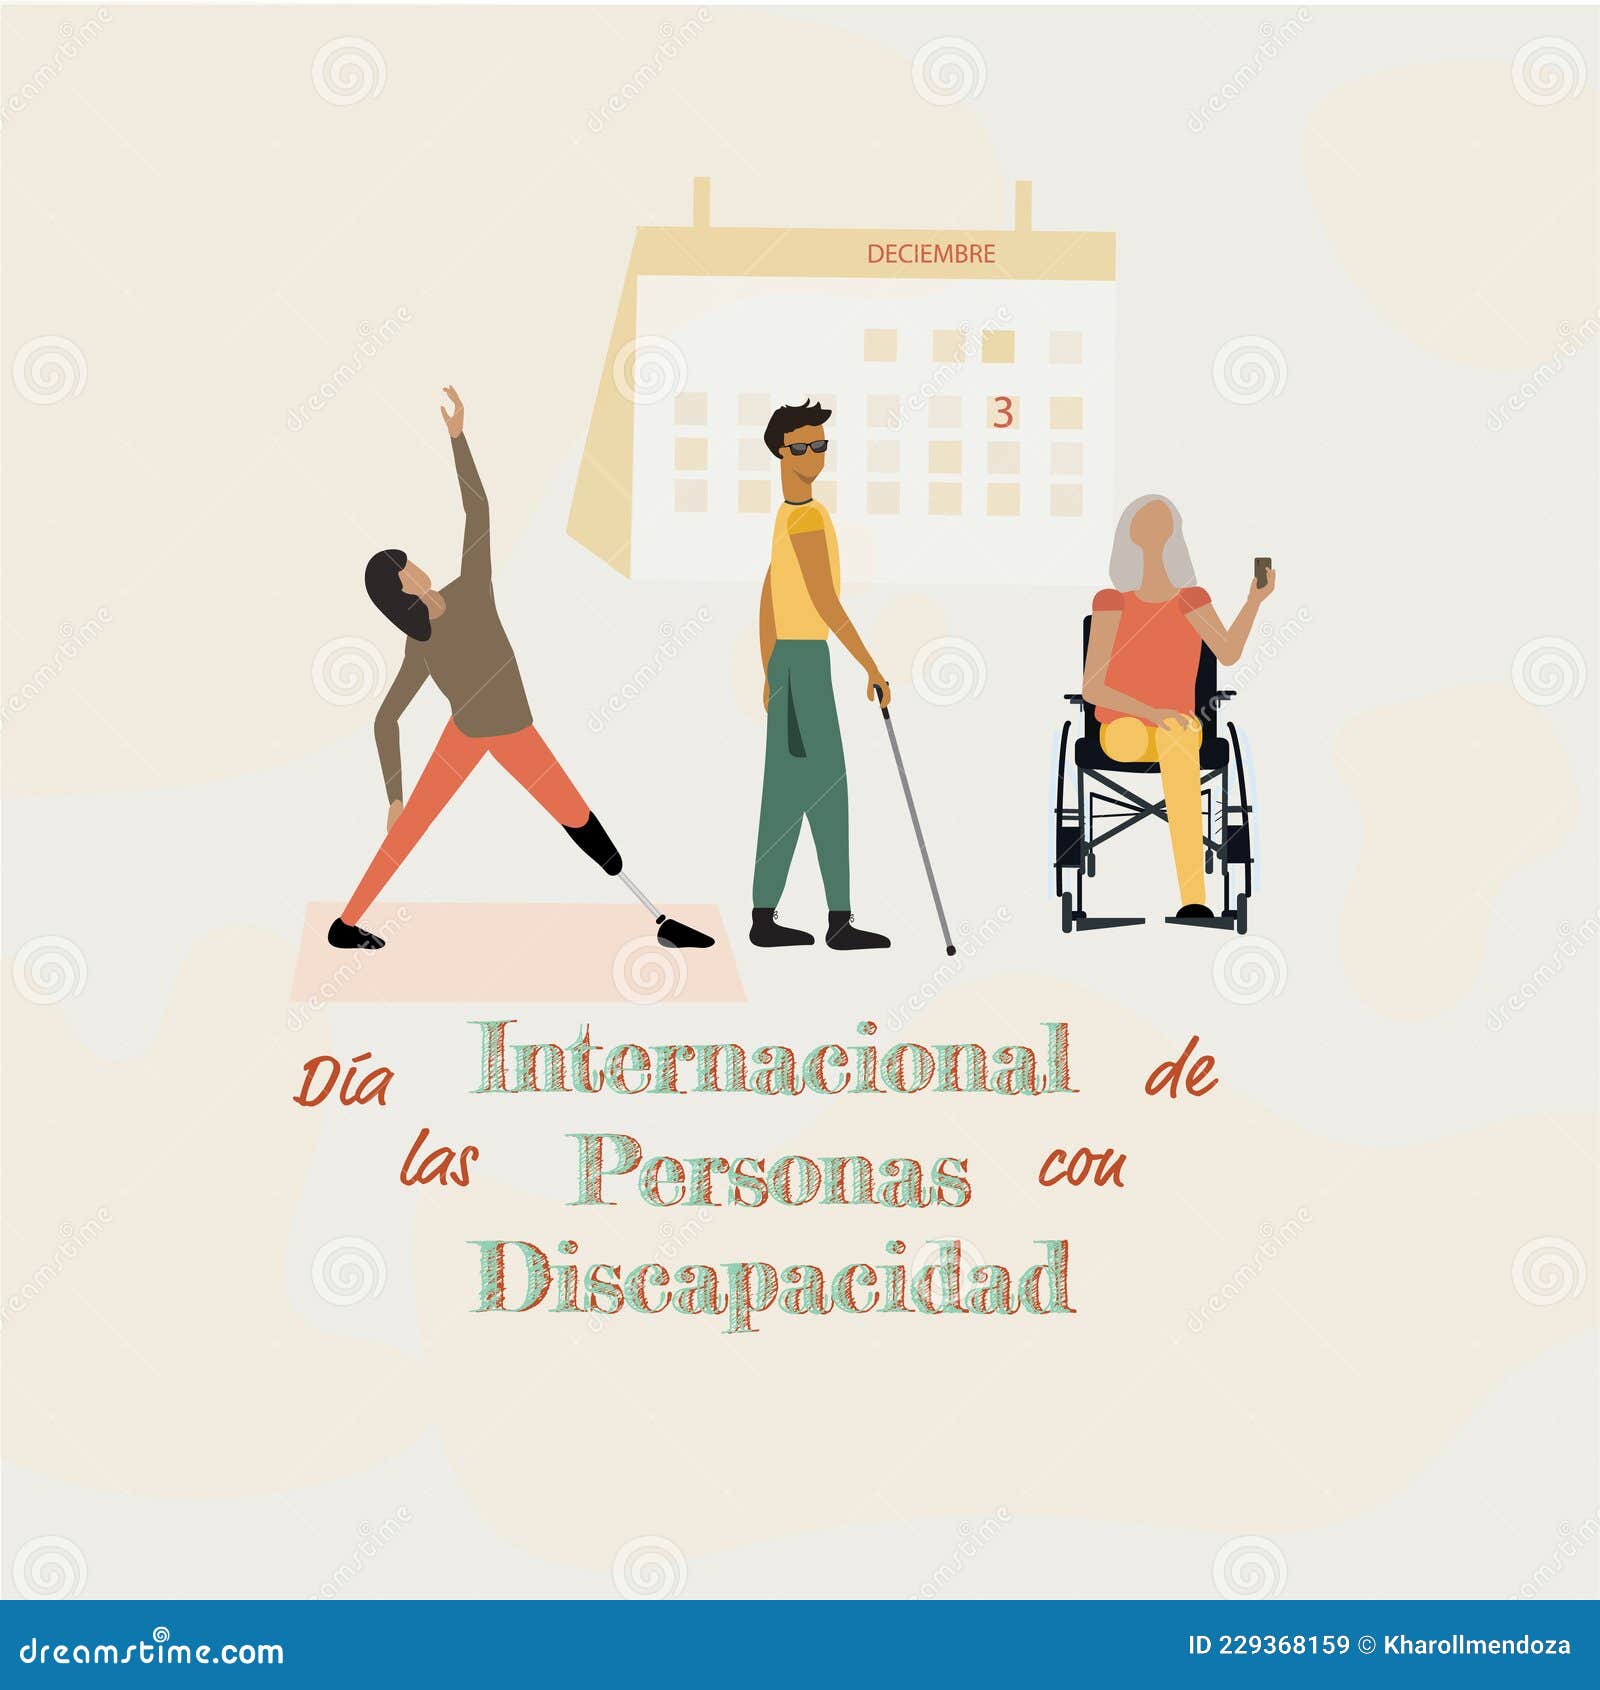 background with disabled people, background with disabled people, international day of persons with disabilities